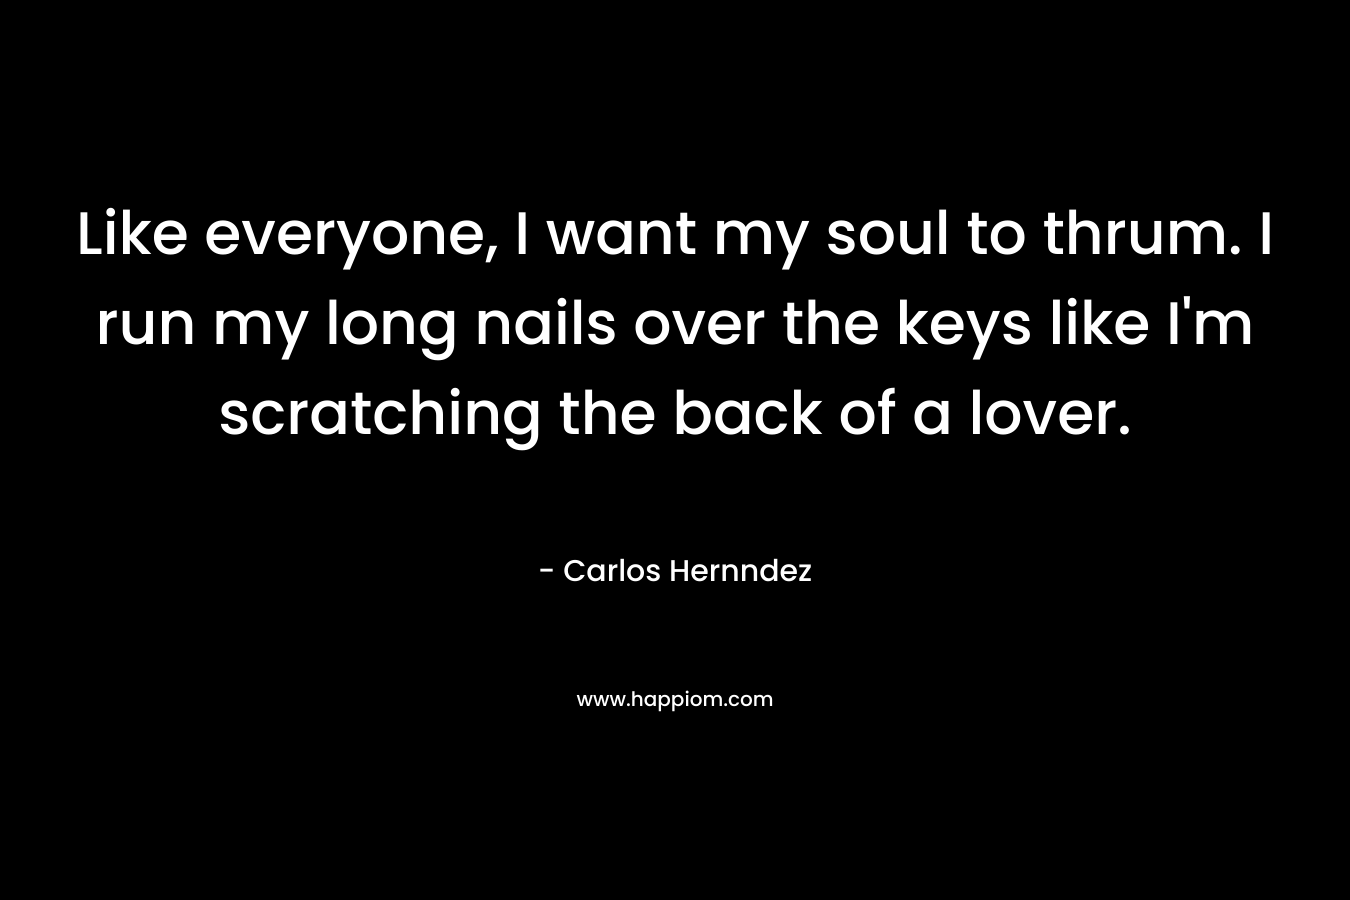 Like everyone, I want my soul to thrum. I run my long nails over the keys like I'm scratching the back of a lover.